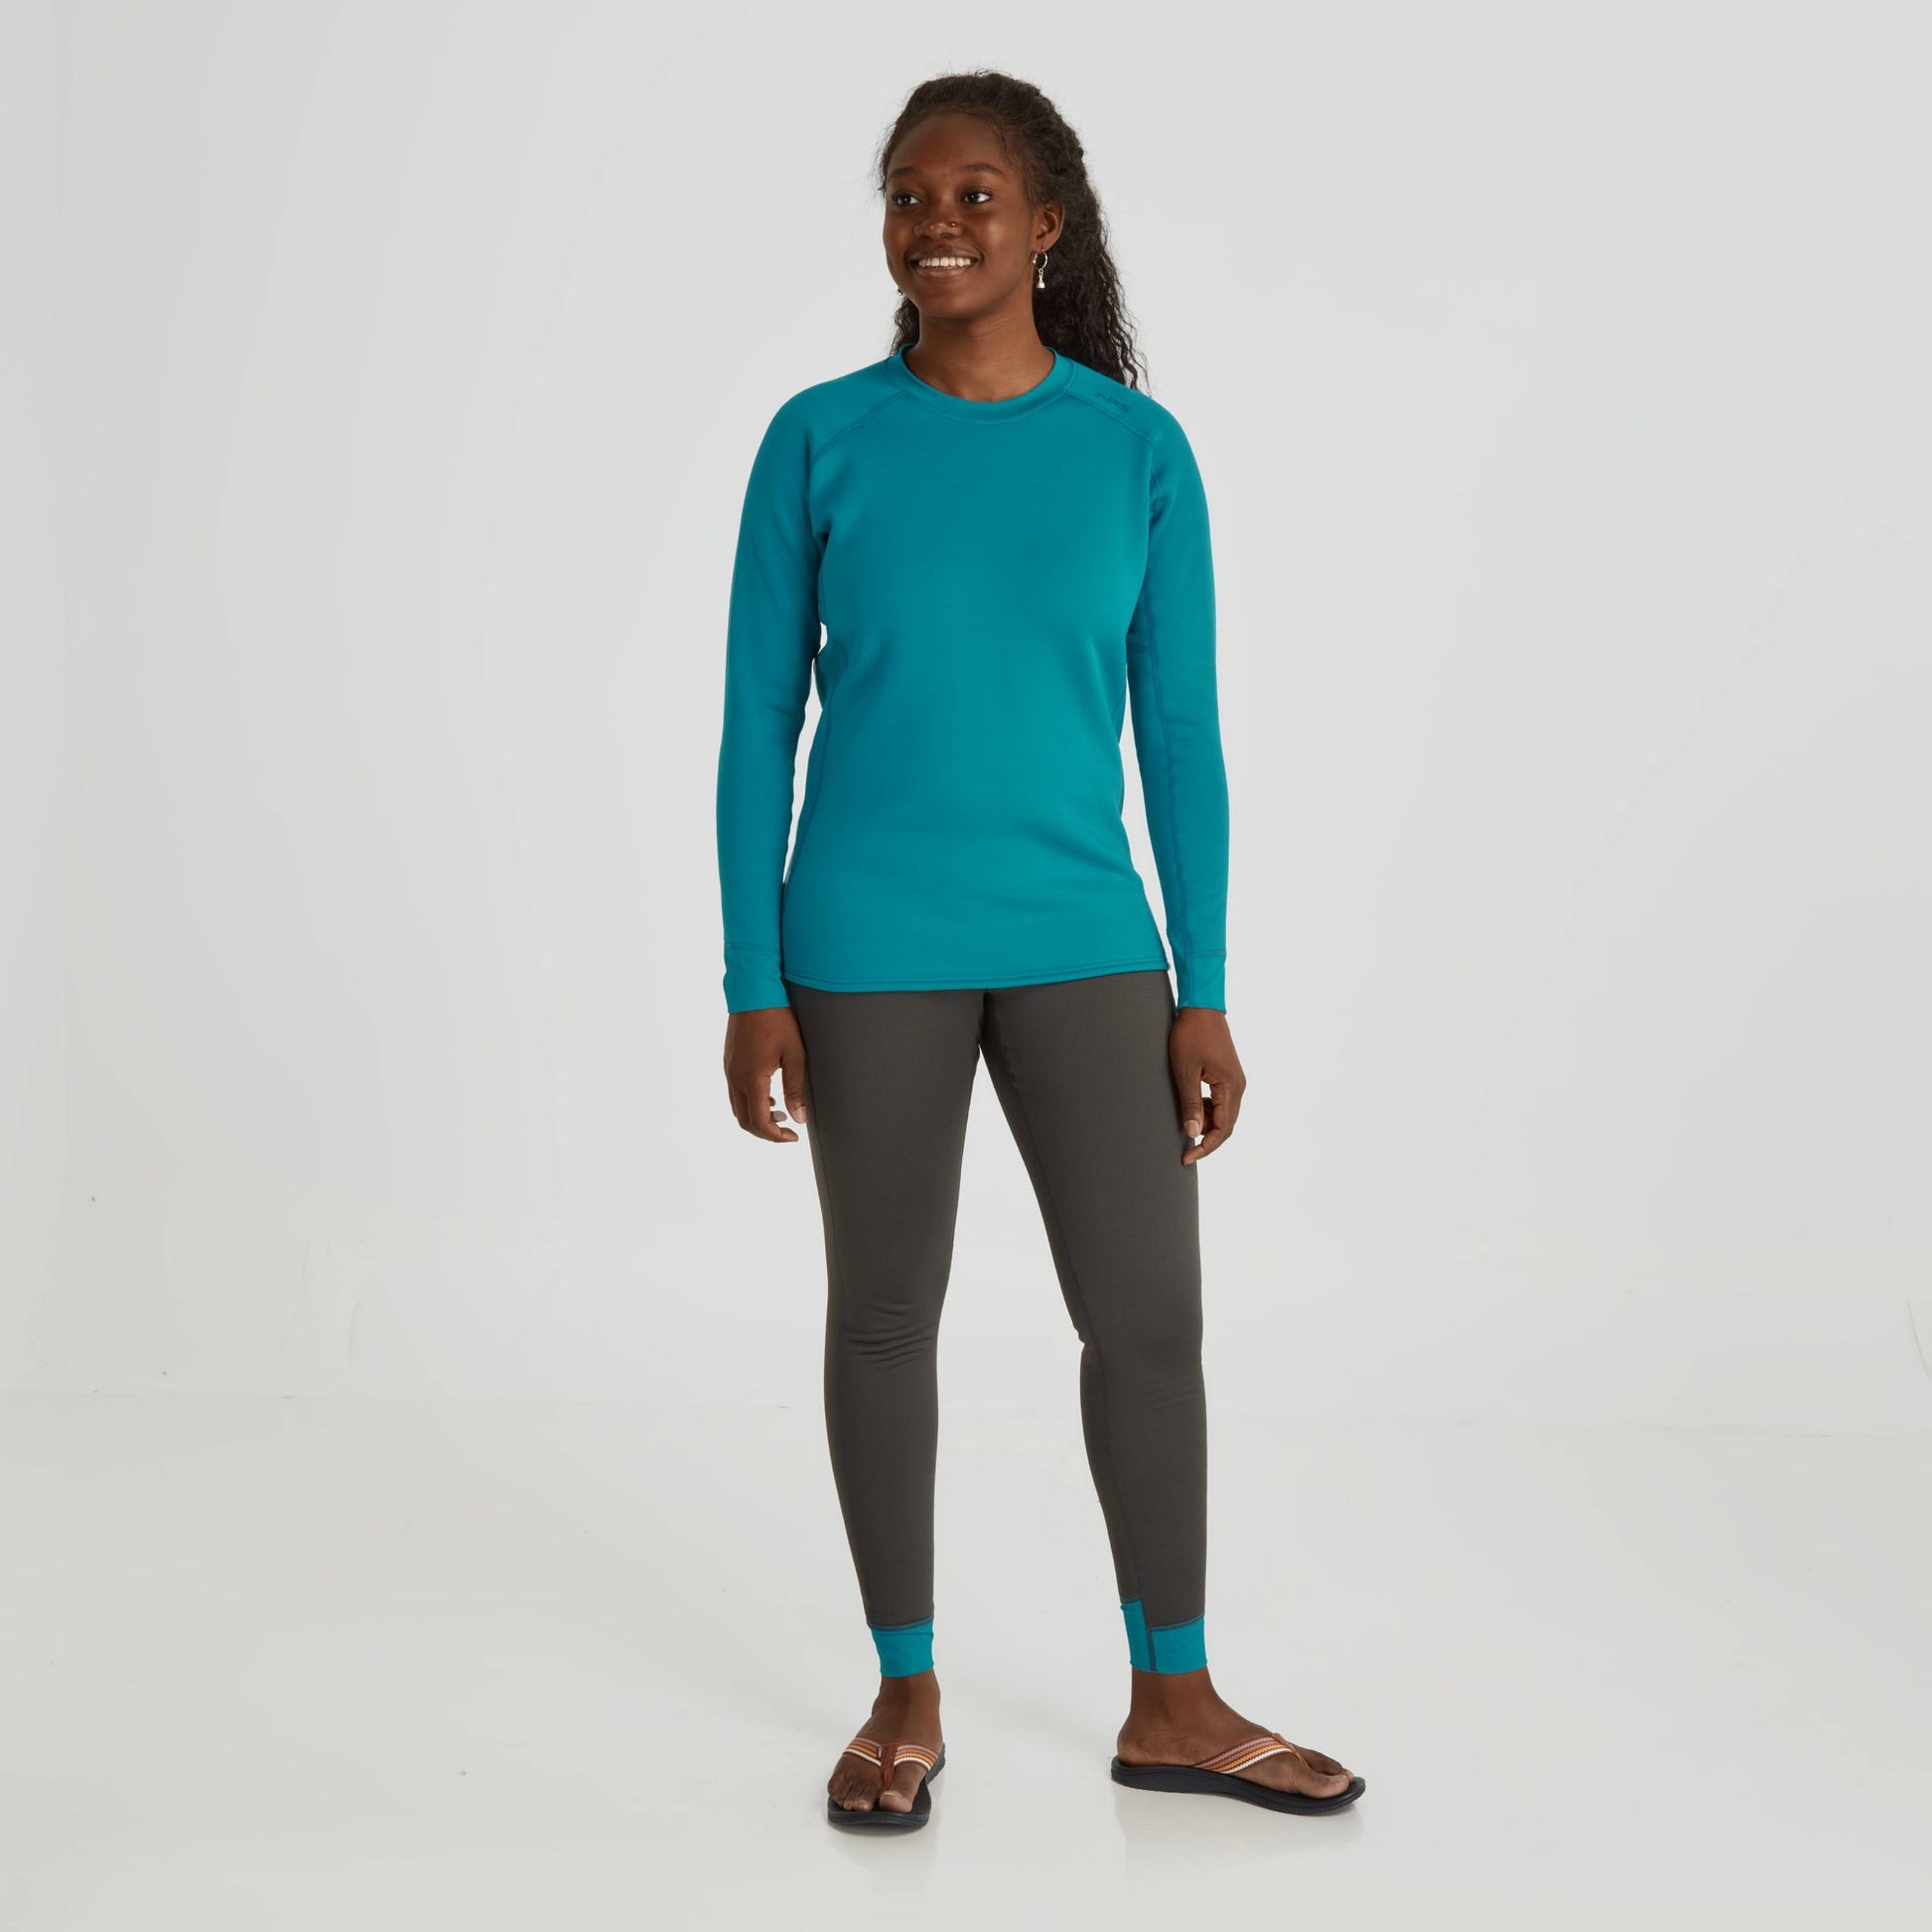 A woman wearing an NRS Expedition Weight Shirt - Women's for warmth and enhanced mobility, paired with grey leggings.